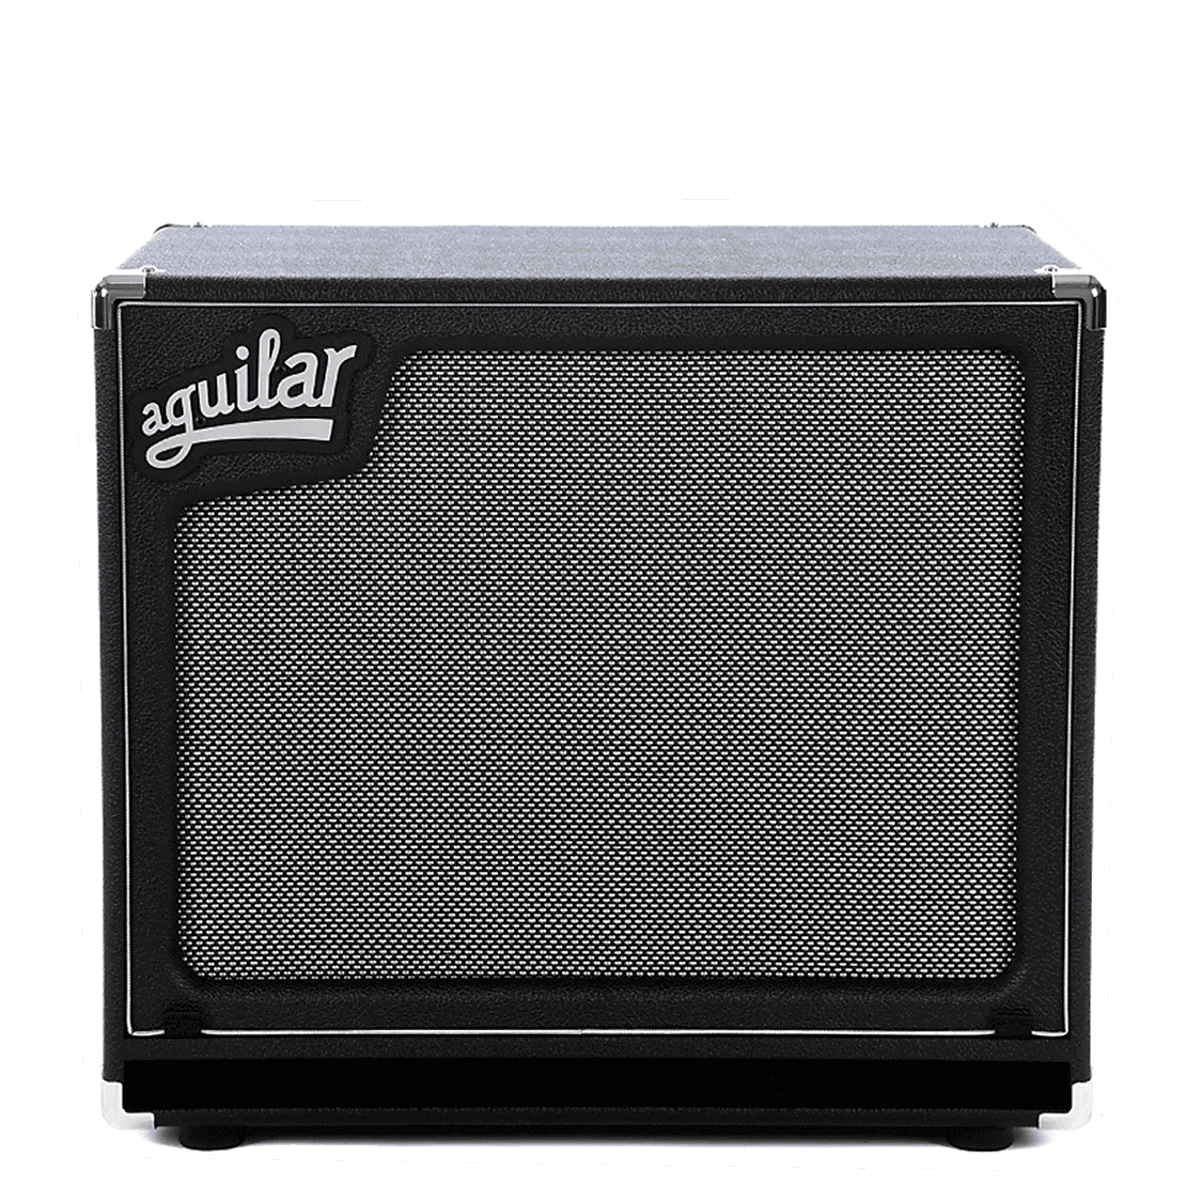 Aguilar SL 115 - The SL 115 offers incredible sonic flexibility whether used as a stand-alone cabinet or paired with another cabinet such as the SL 410x. Weighing only 34 lbs. (15.42 kg), the SL 115 is available in 4 or 8 ohm versions and can handle 400 w